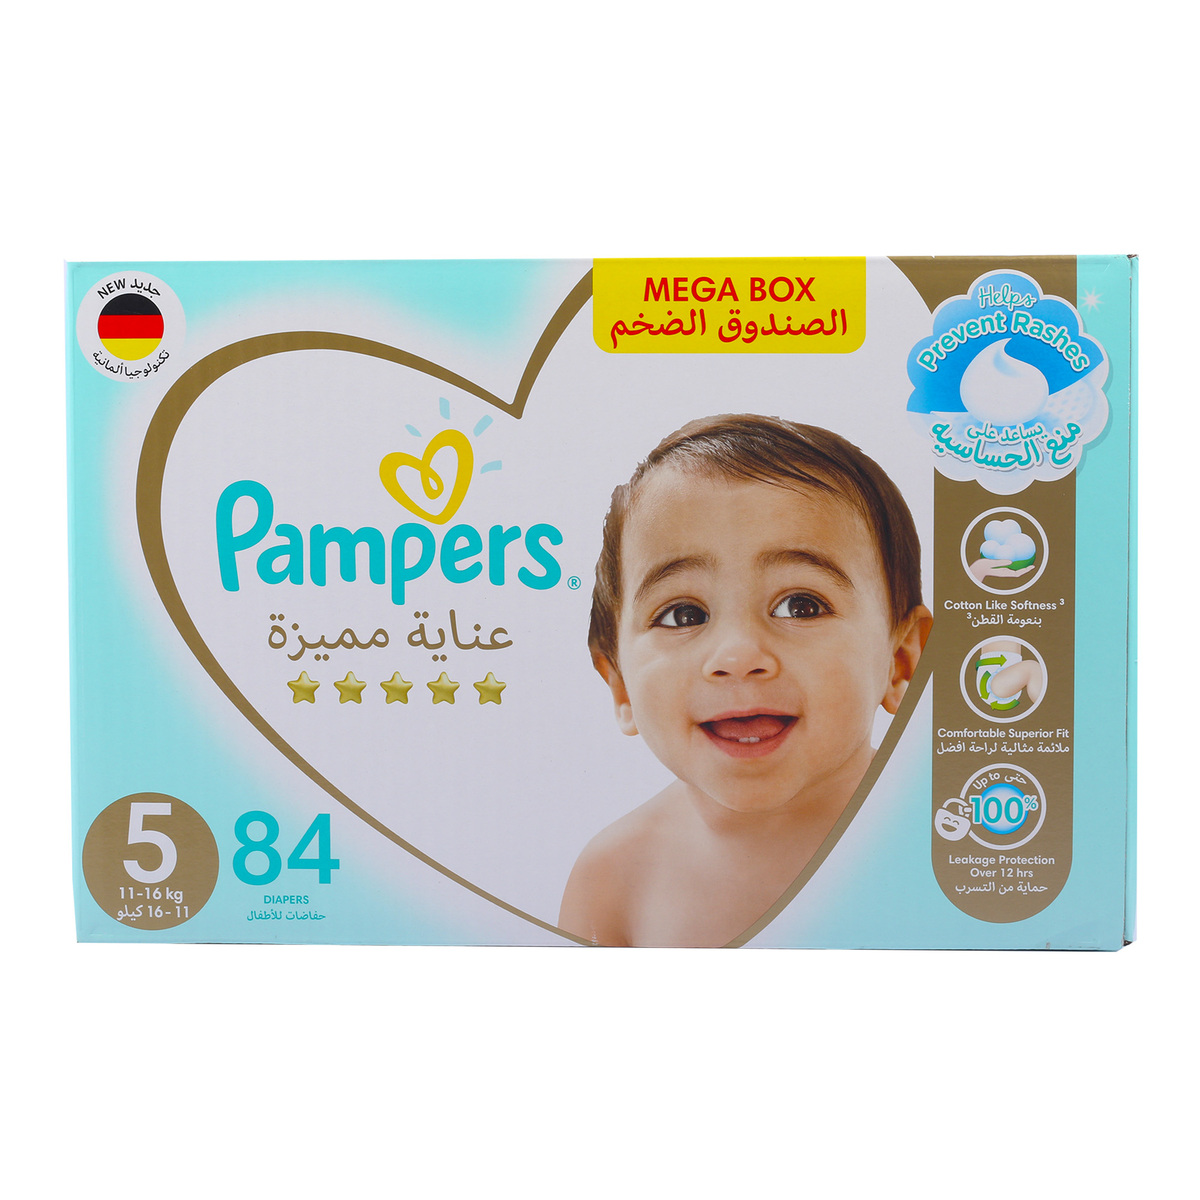 Pampers Premium Diaper Extra Absorb Size 5 11-16 kg Value Pack 84 pcs